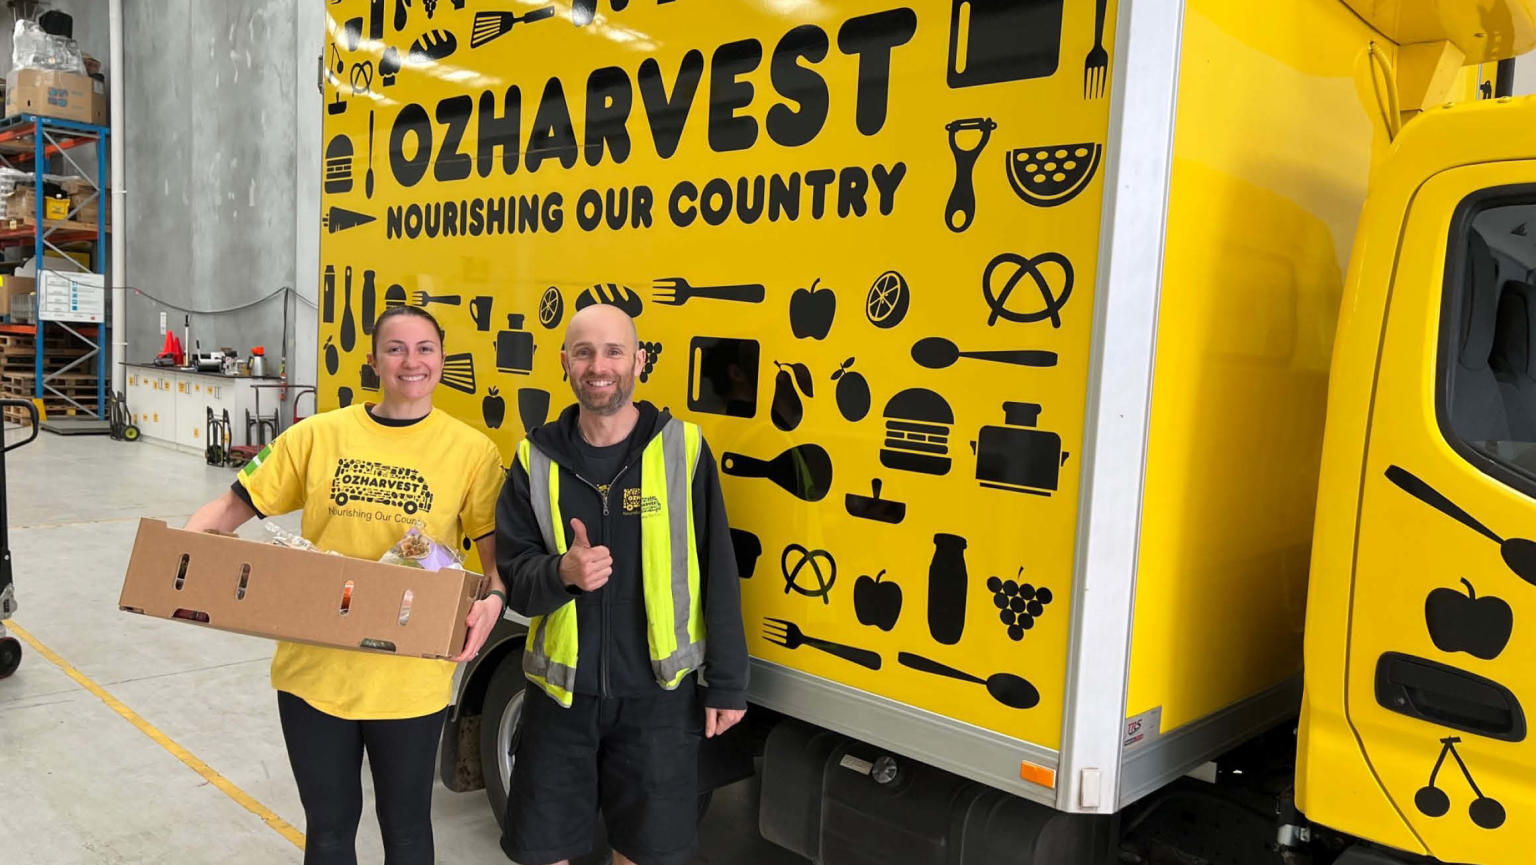 An image showing two people - one holding a cardboard box of food and wearing a yellow OzHarvest t-shirt, and the other wearing a black hoodie and a yellow high vis vest doing a thumbs up - standing and smiling in front of a yellow OzHarvest van. 